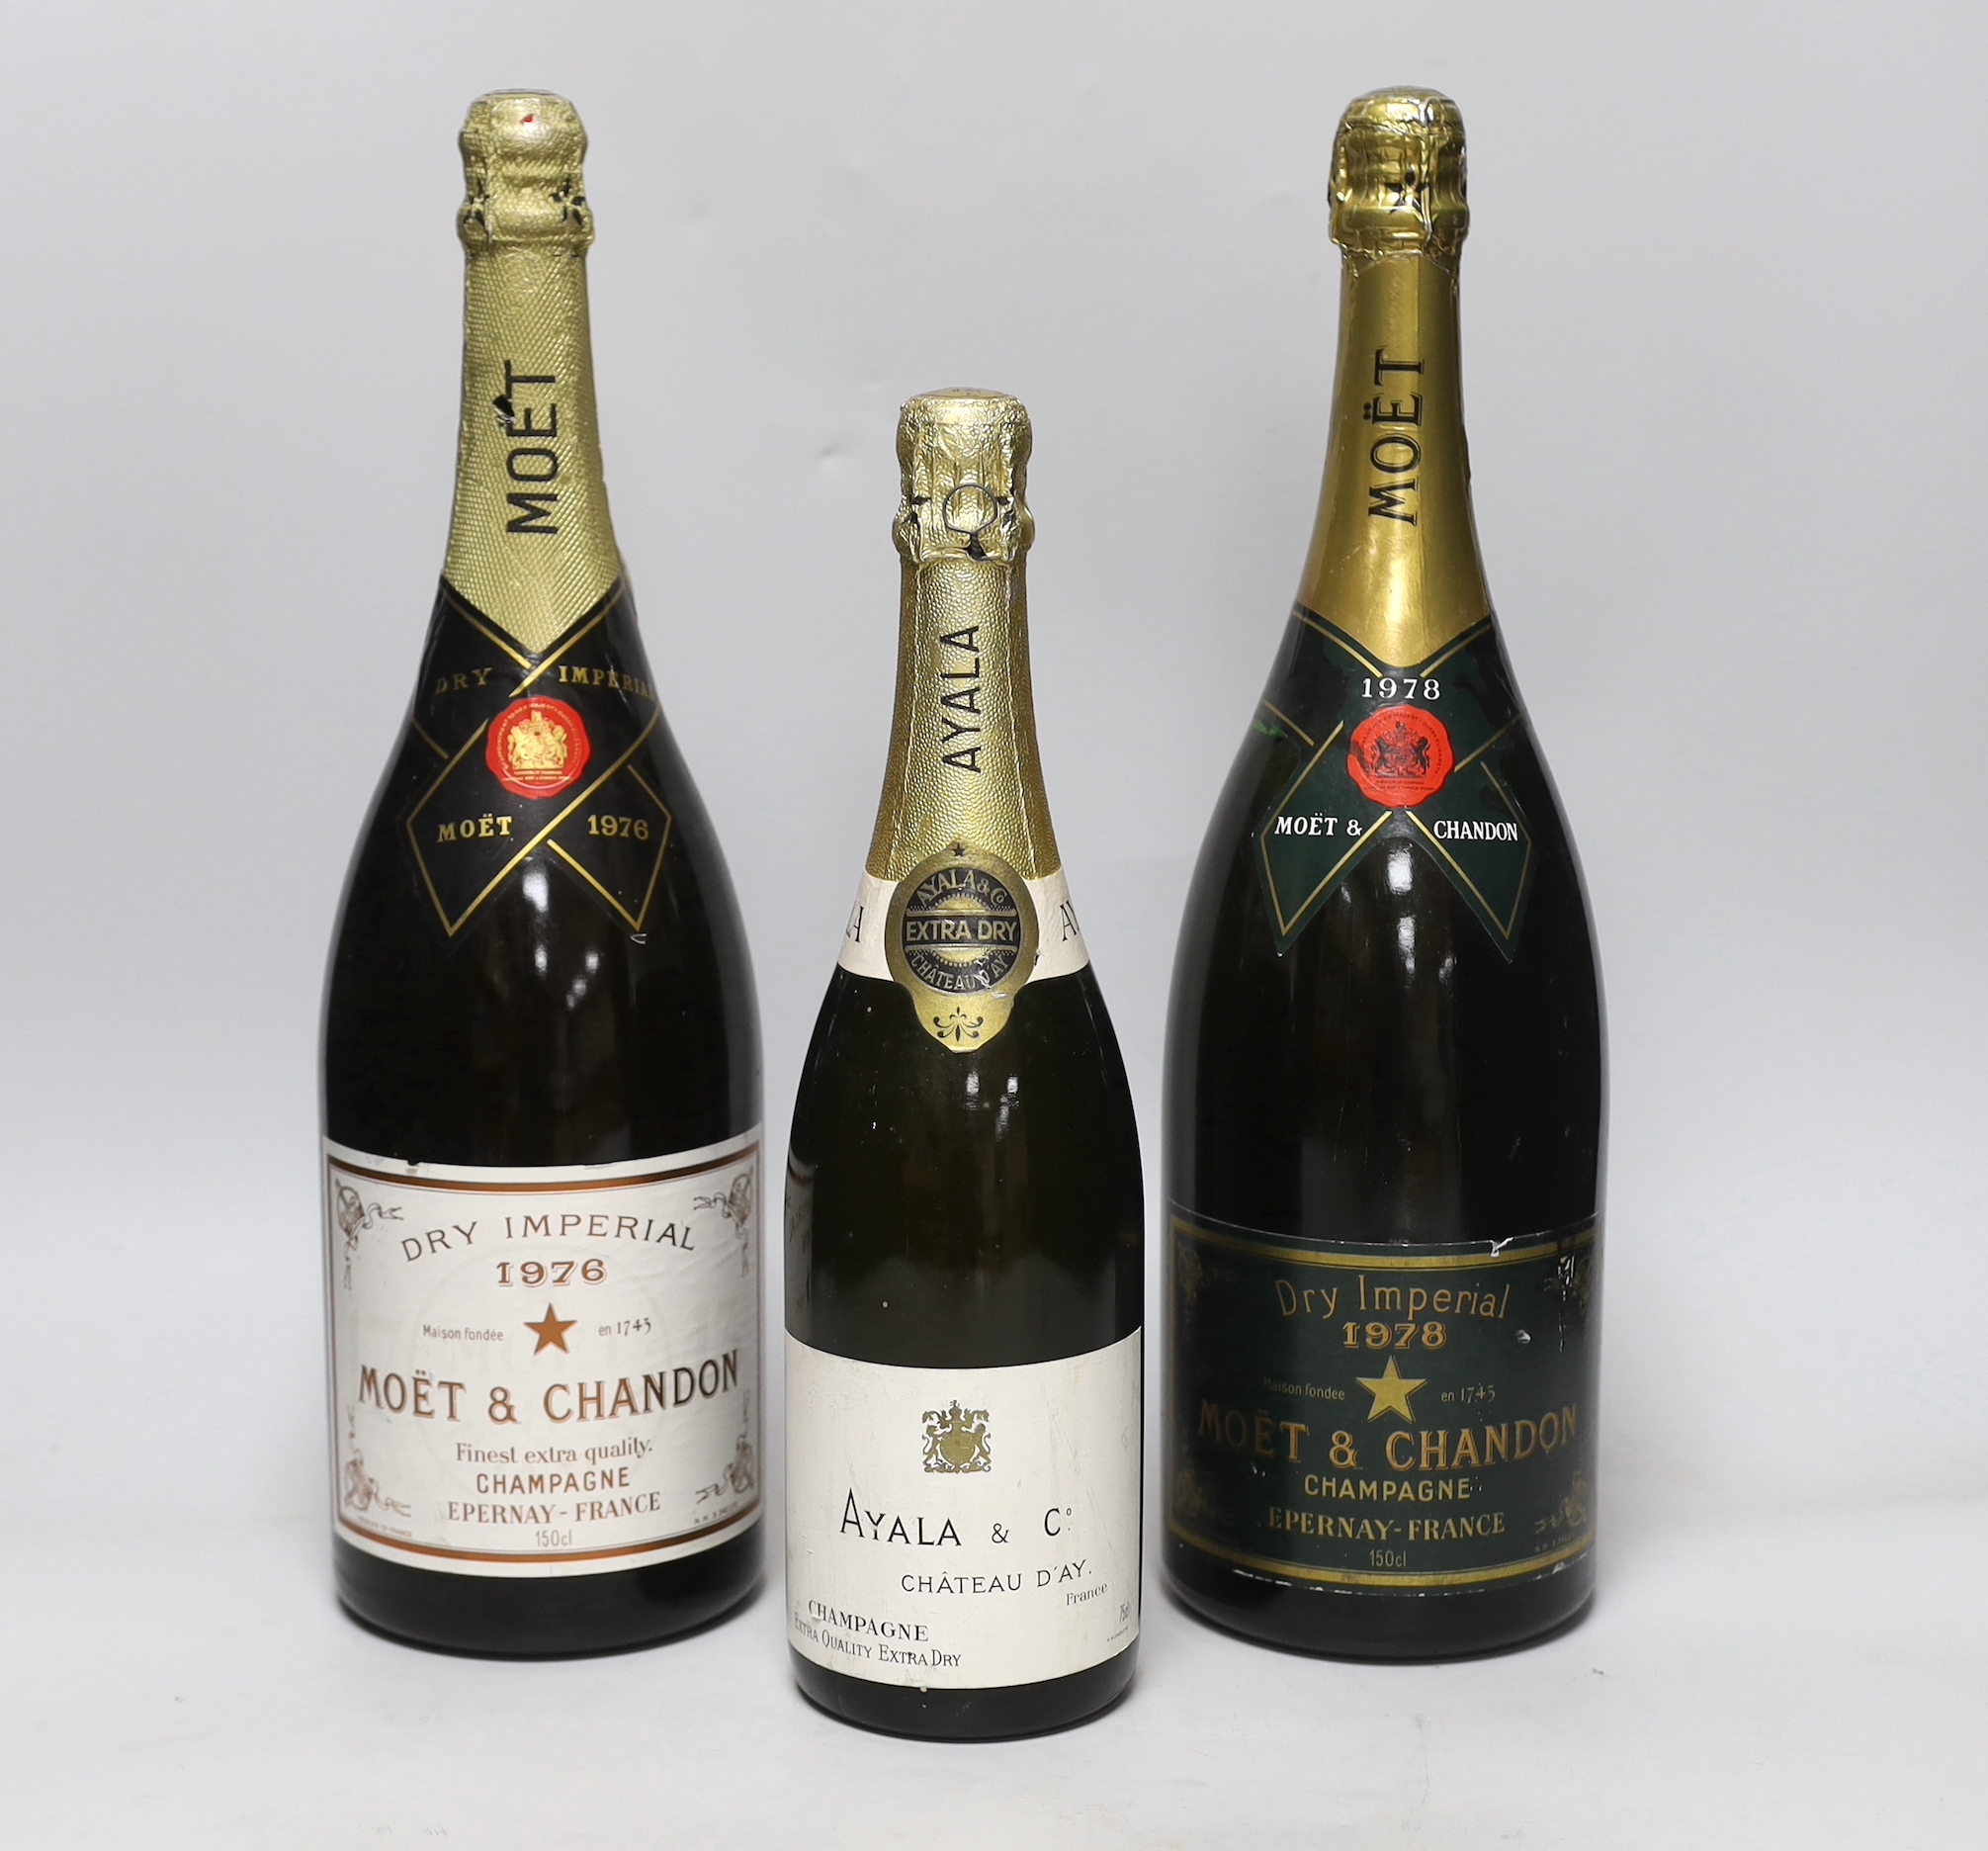 A bottle of Ayala & Co, Chateau D'ay Champagne, a magnum of Moet et Chandon champagne 1978 and a magnum of Moet et Chandon champagne 1976